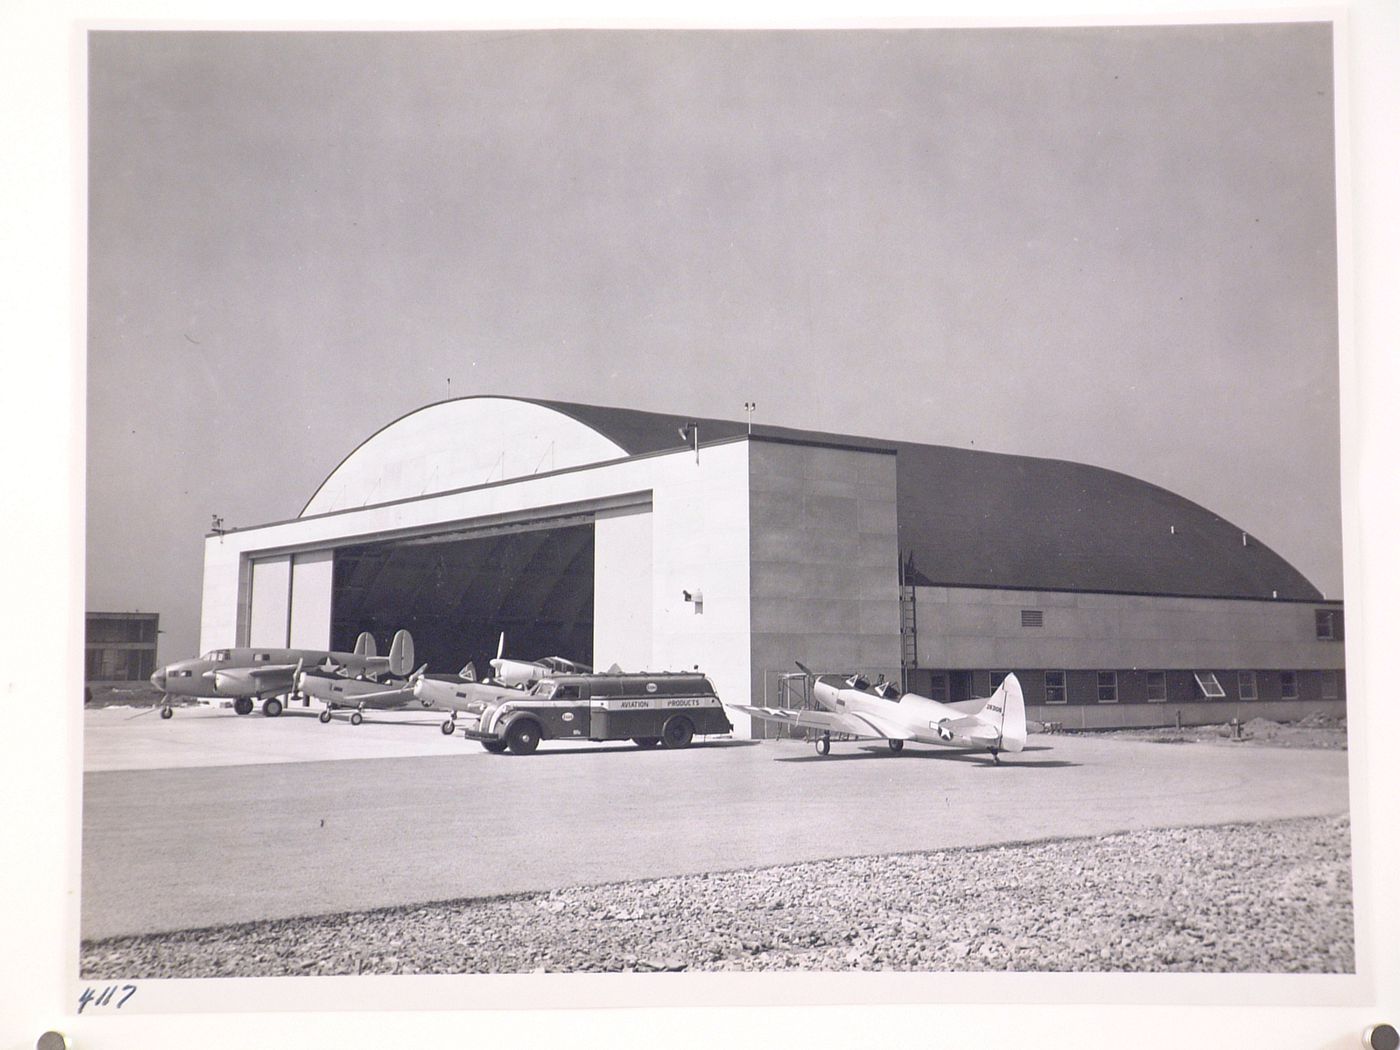 View of the principal and lateral façades of the Hangar Building, Fairchild Engine and Airplane Corporation Aircraft division Assembly Plant, Hagerstown, Maryland